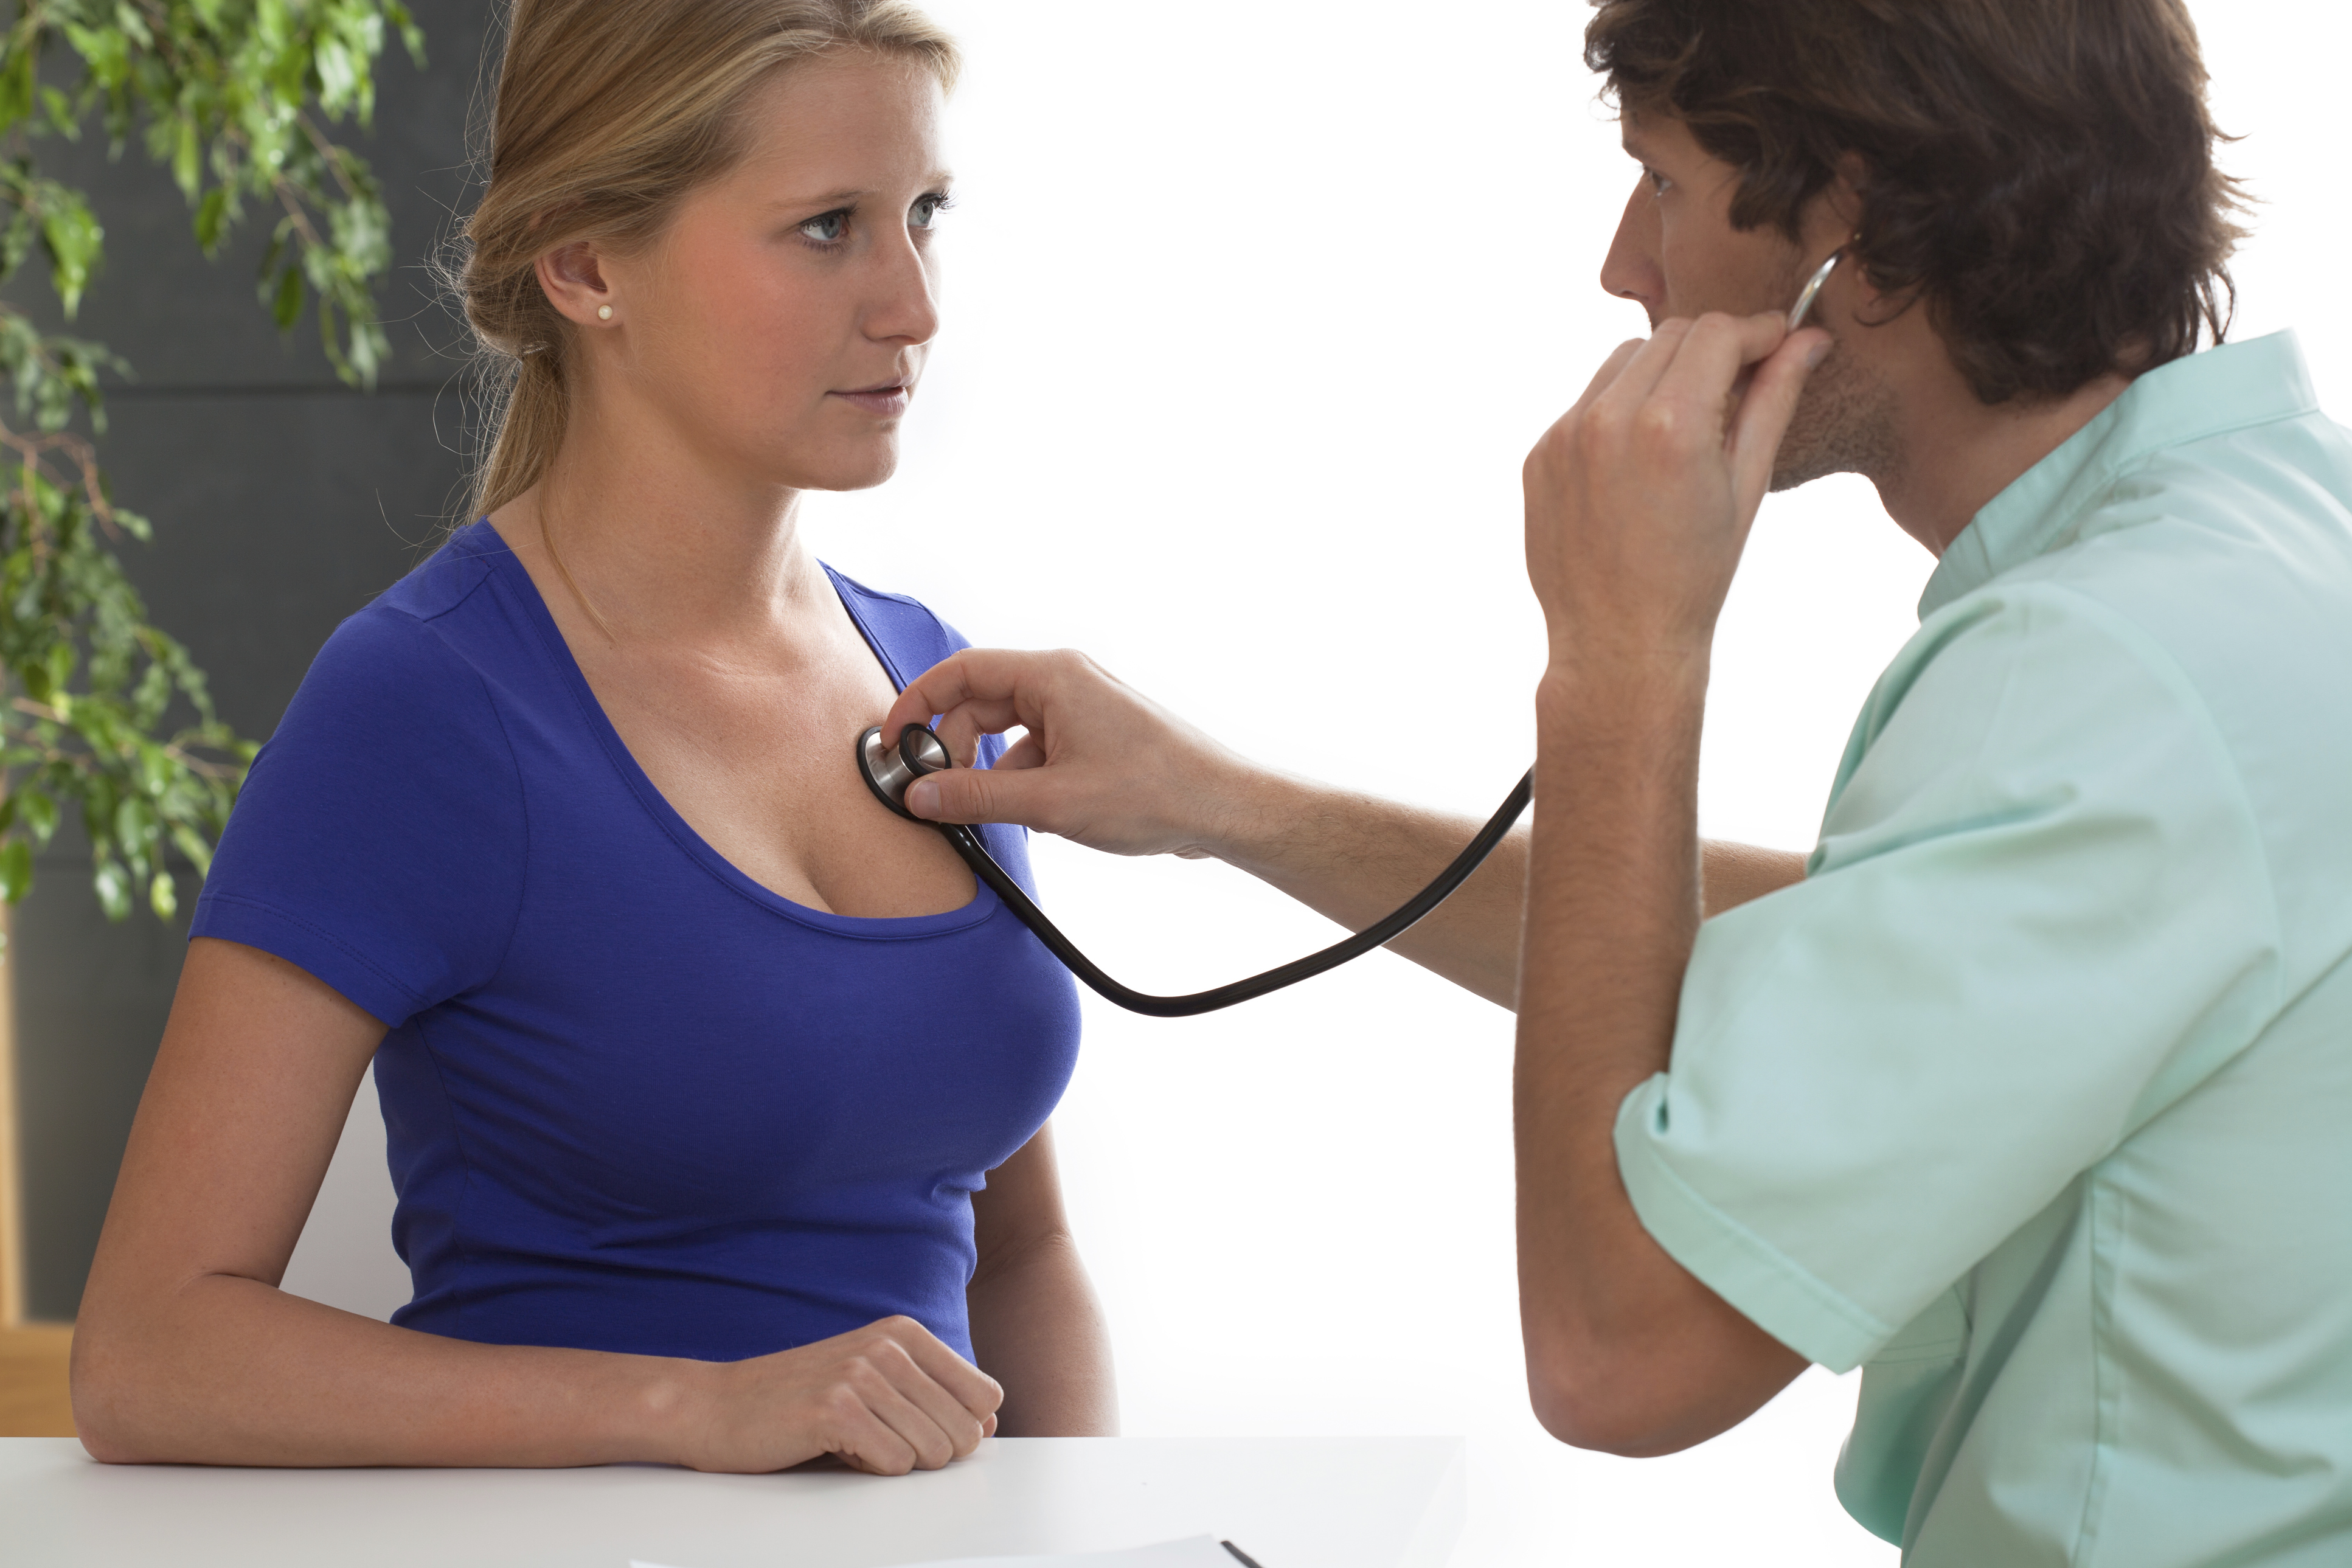 Women, especially younger ones, need a wake-up call about heart health | WTOP